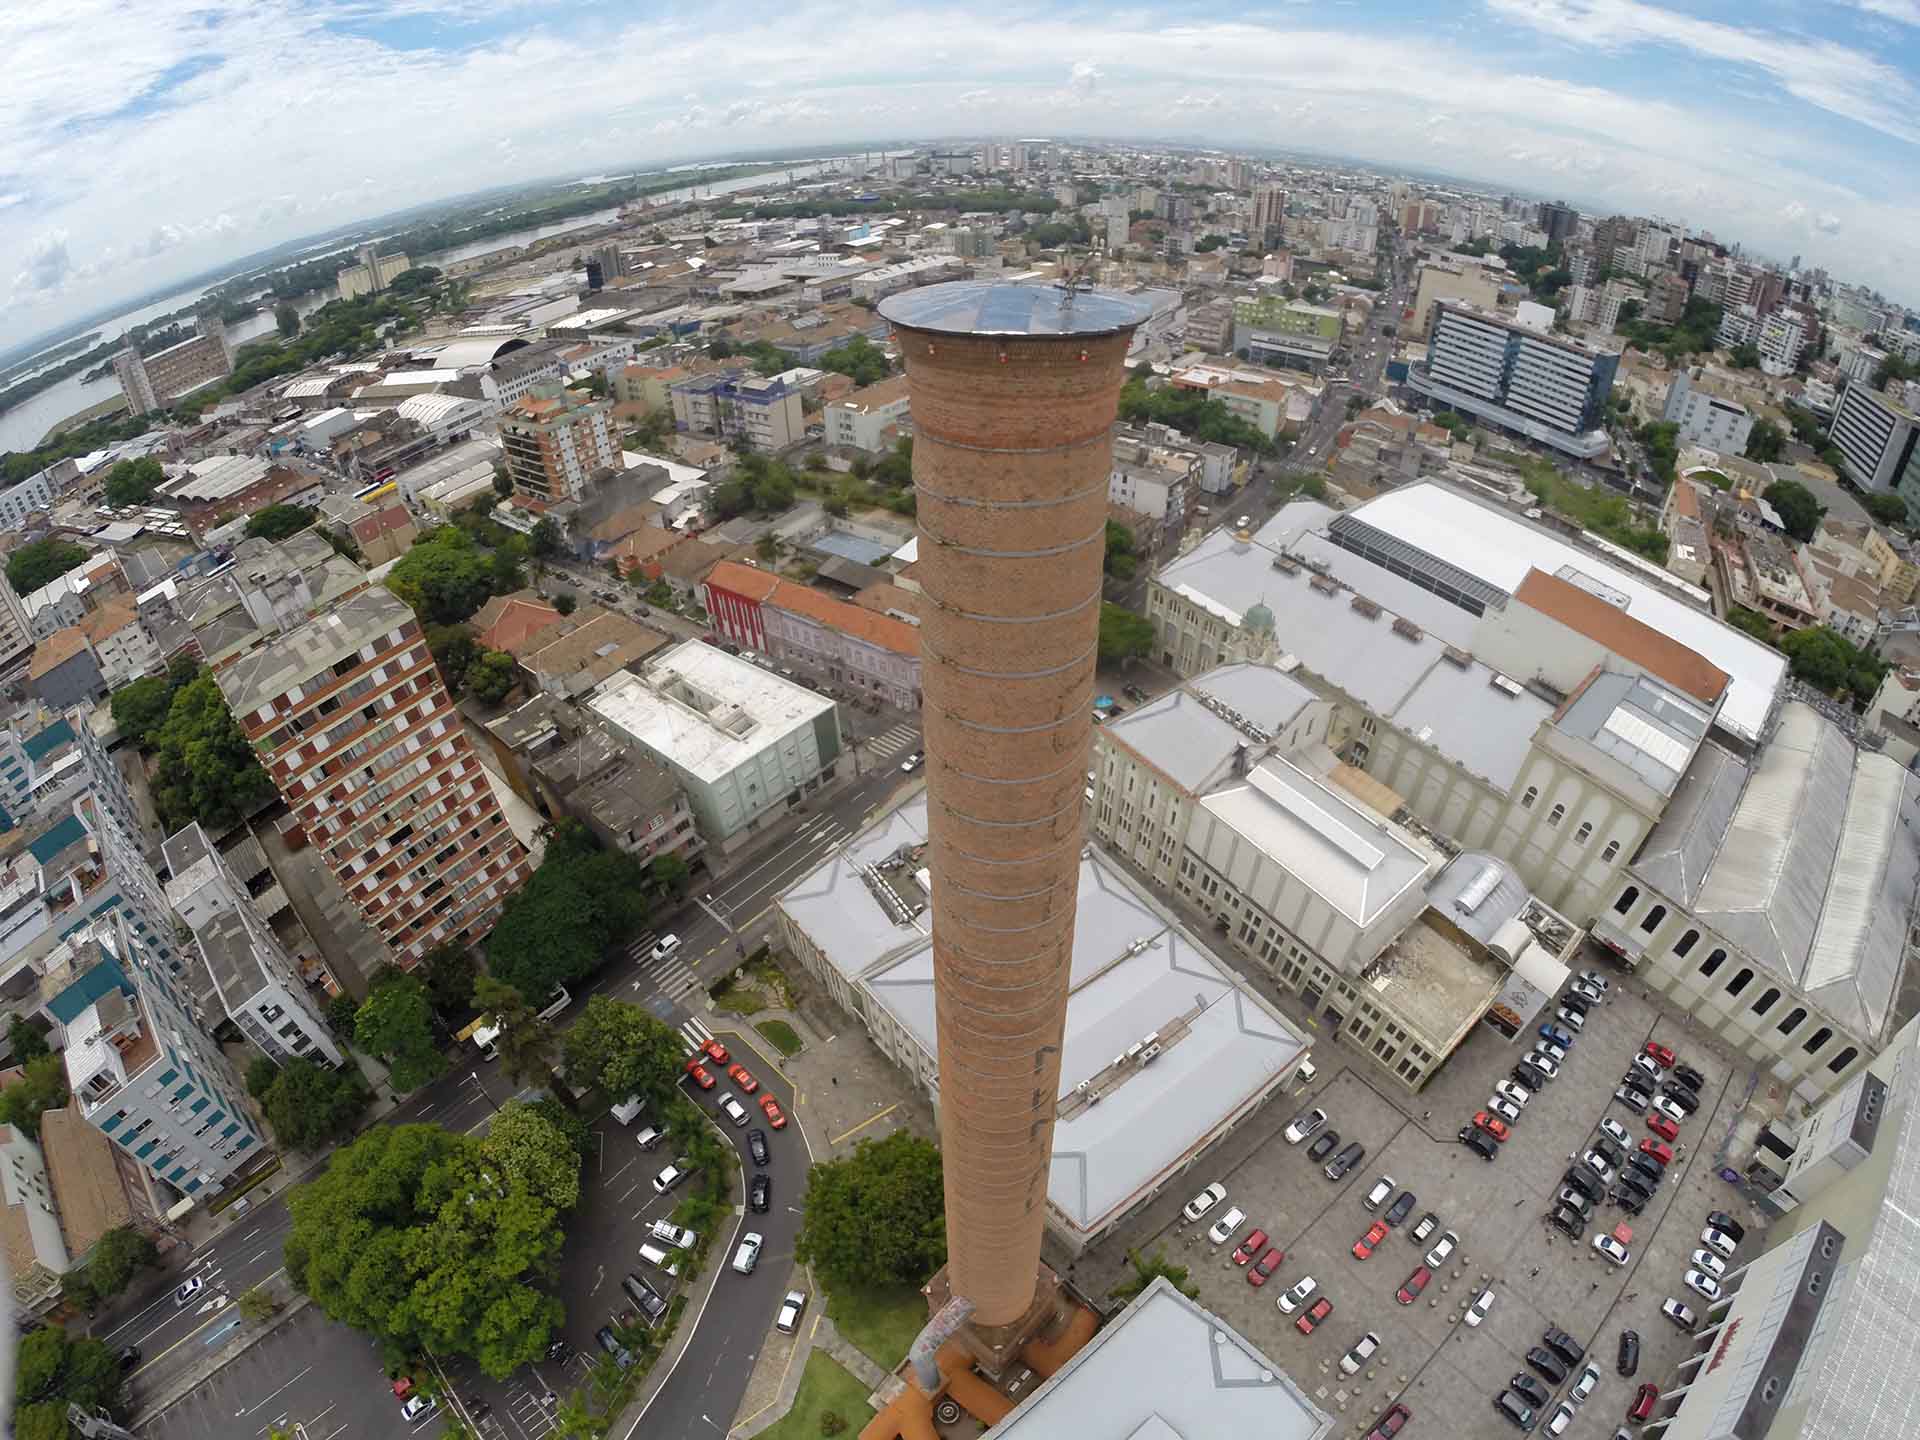 Drone inspection on 150-year-old chimney